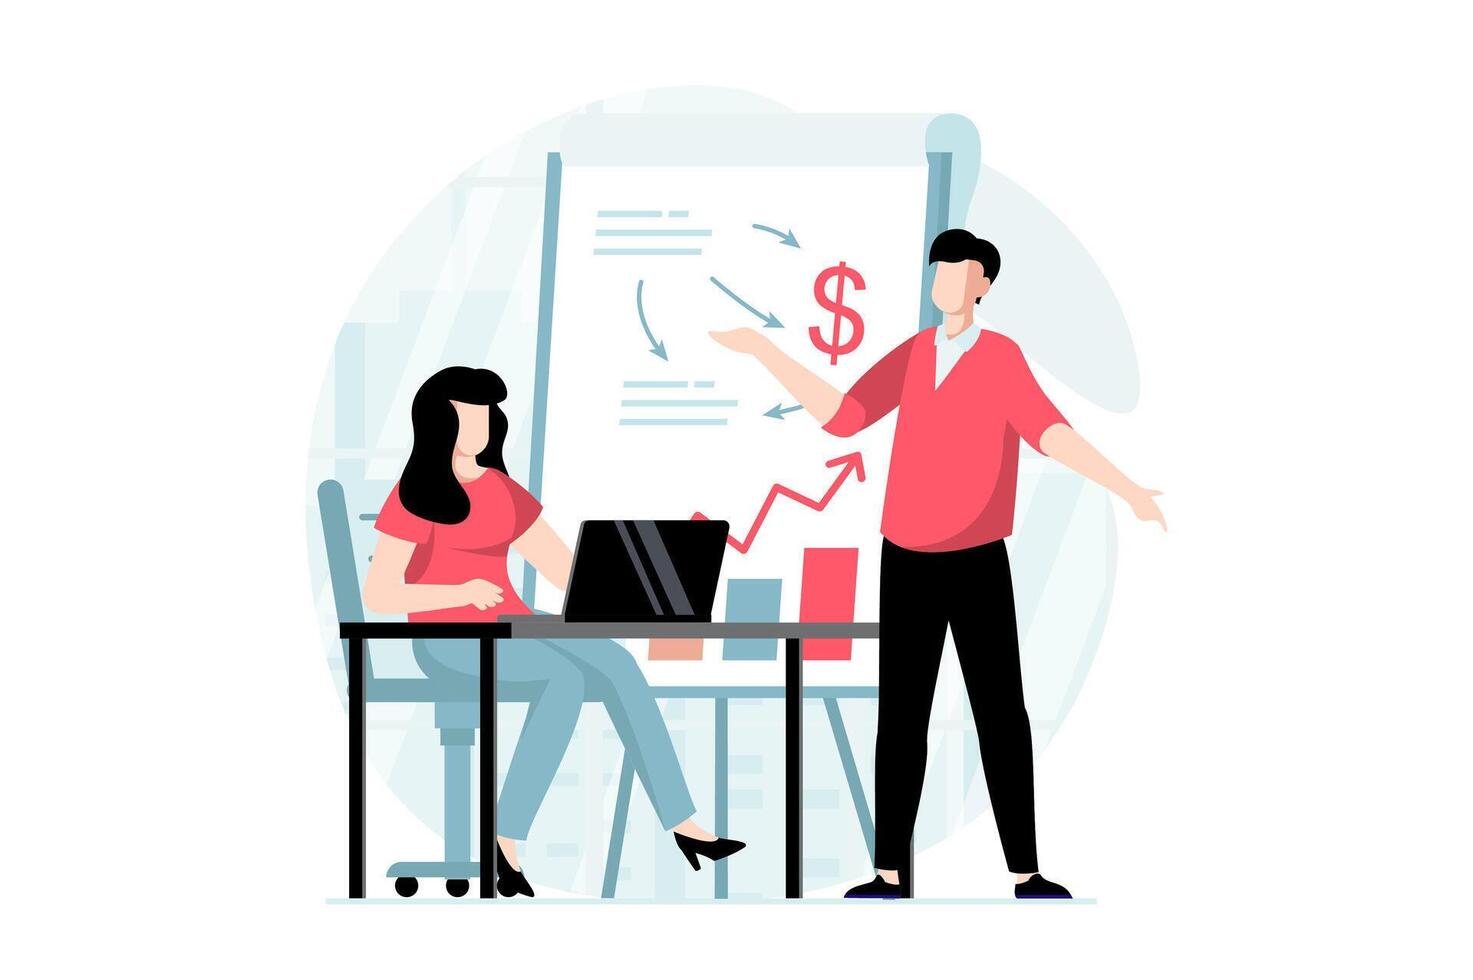 Business making concept with people scene in flat design. Woman and man discuss tasks, analyze financial data, planning at meeting in office. illustration with character situation for web vector